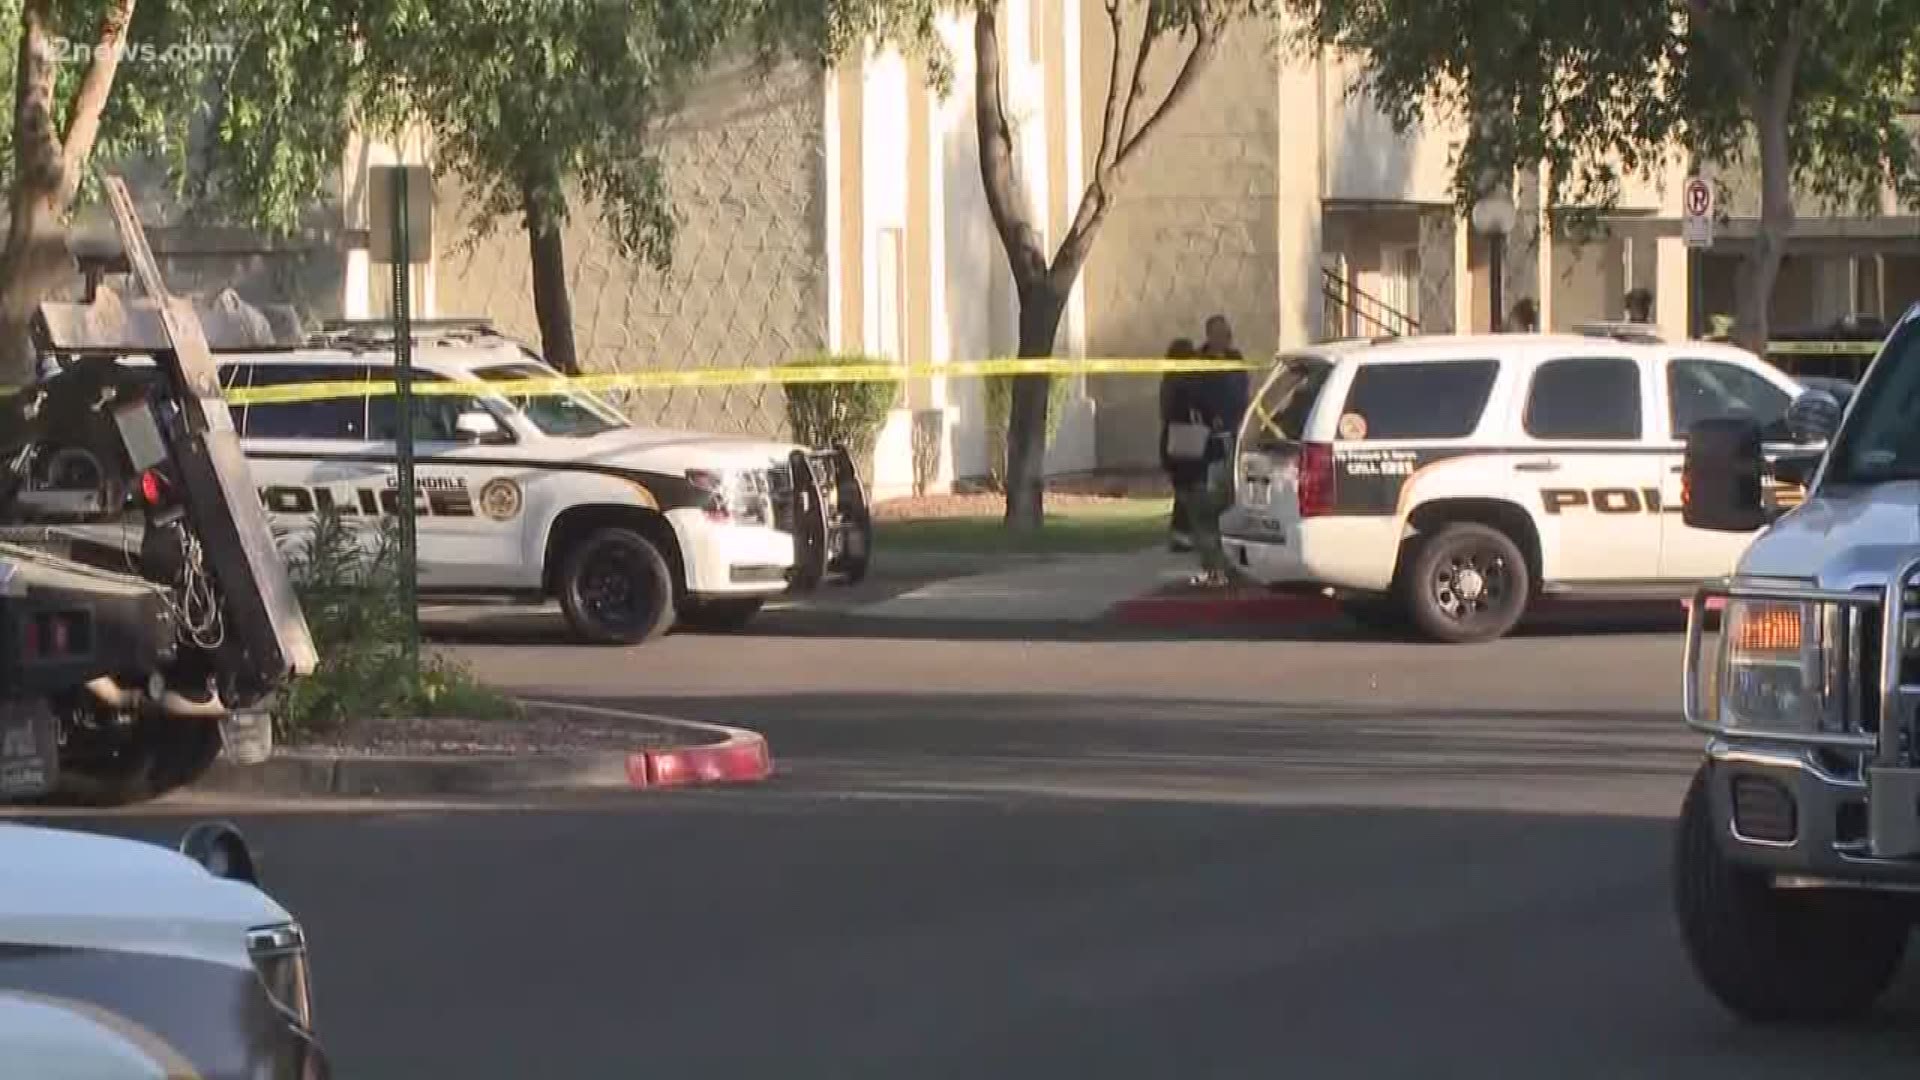 Neighbors were on scene when an 18-month-old girl was pronounced dead after being left in a hot car for several hours. They say the dad was inconsolable when he discovered the little girl had died.